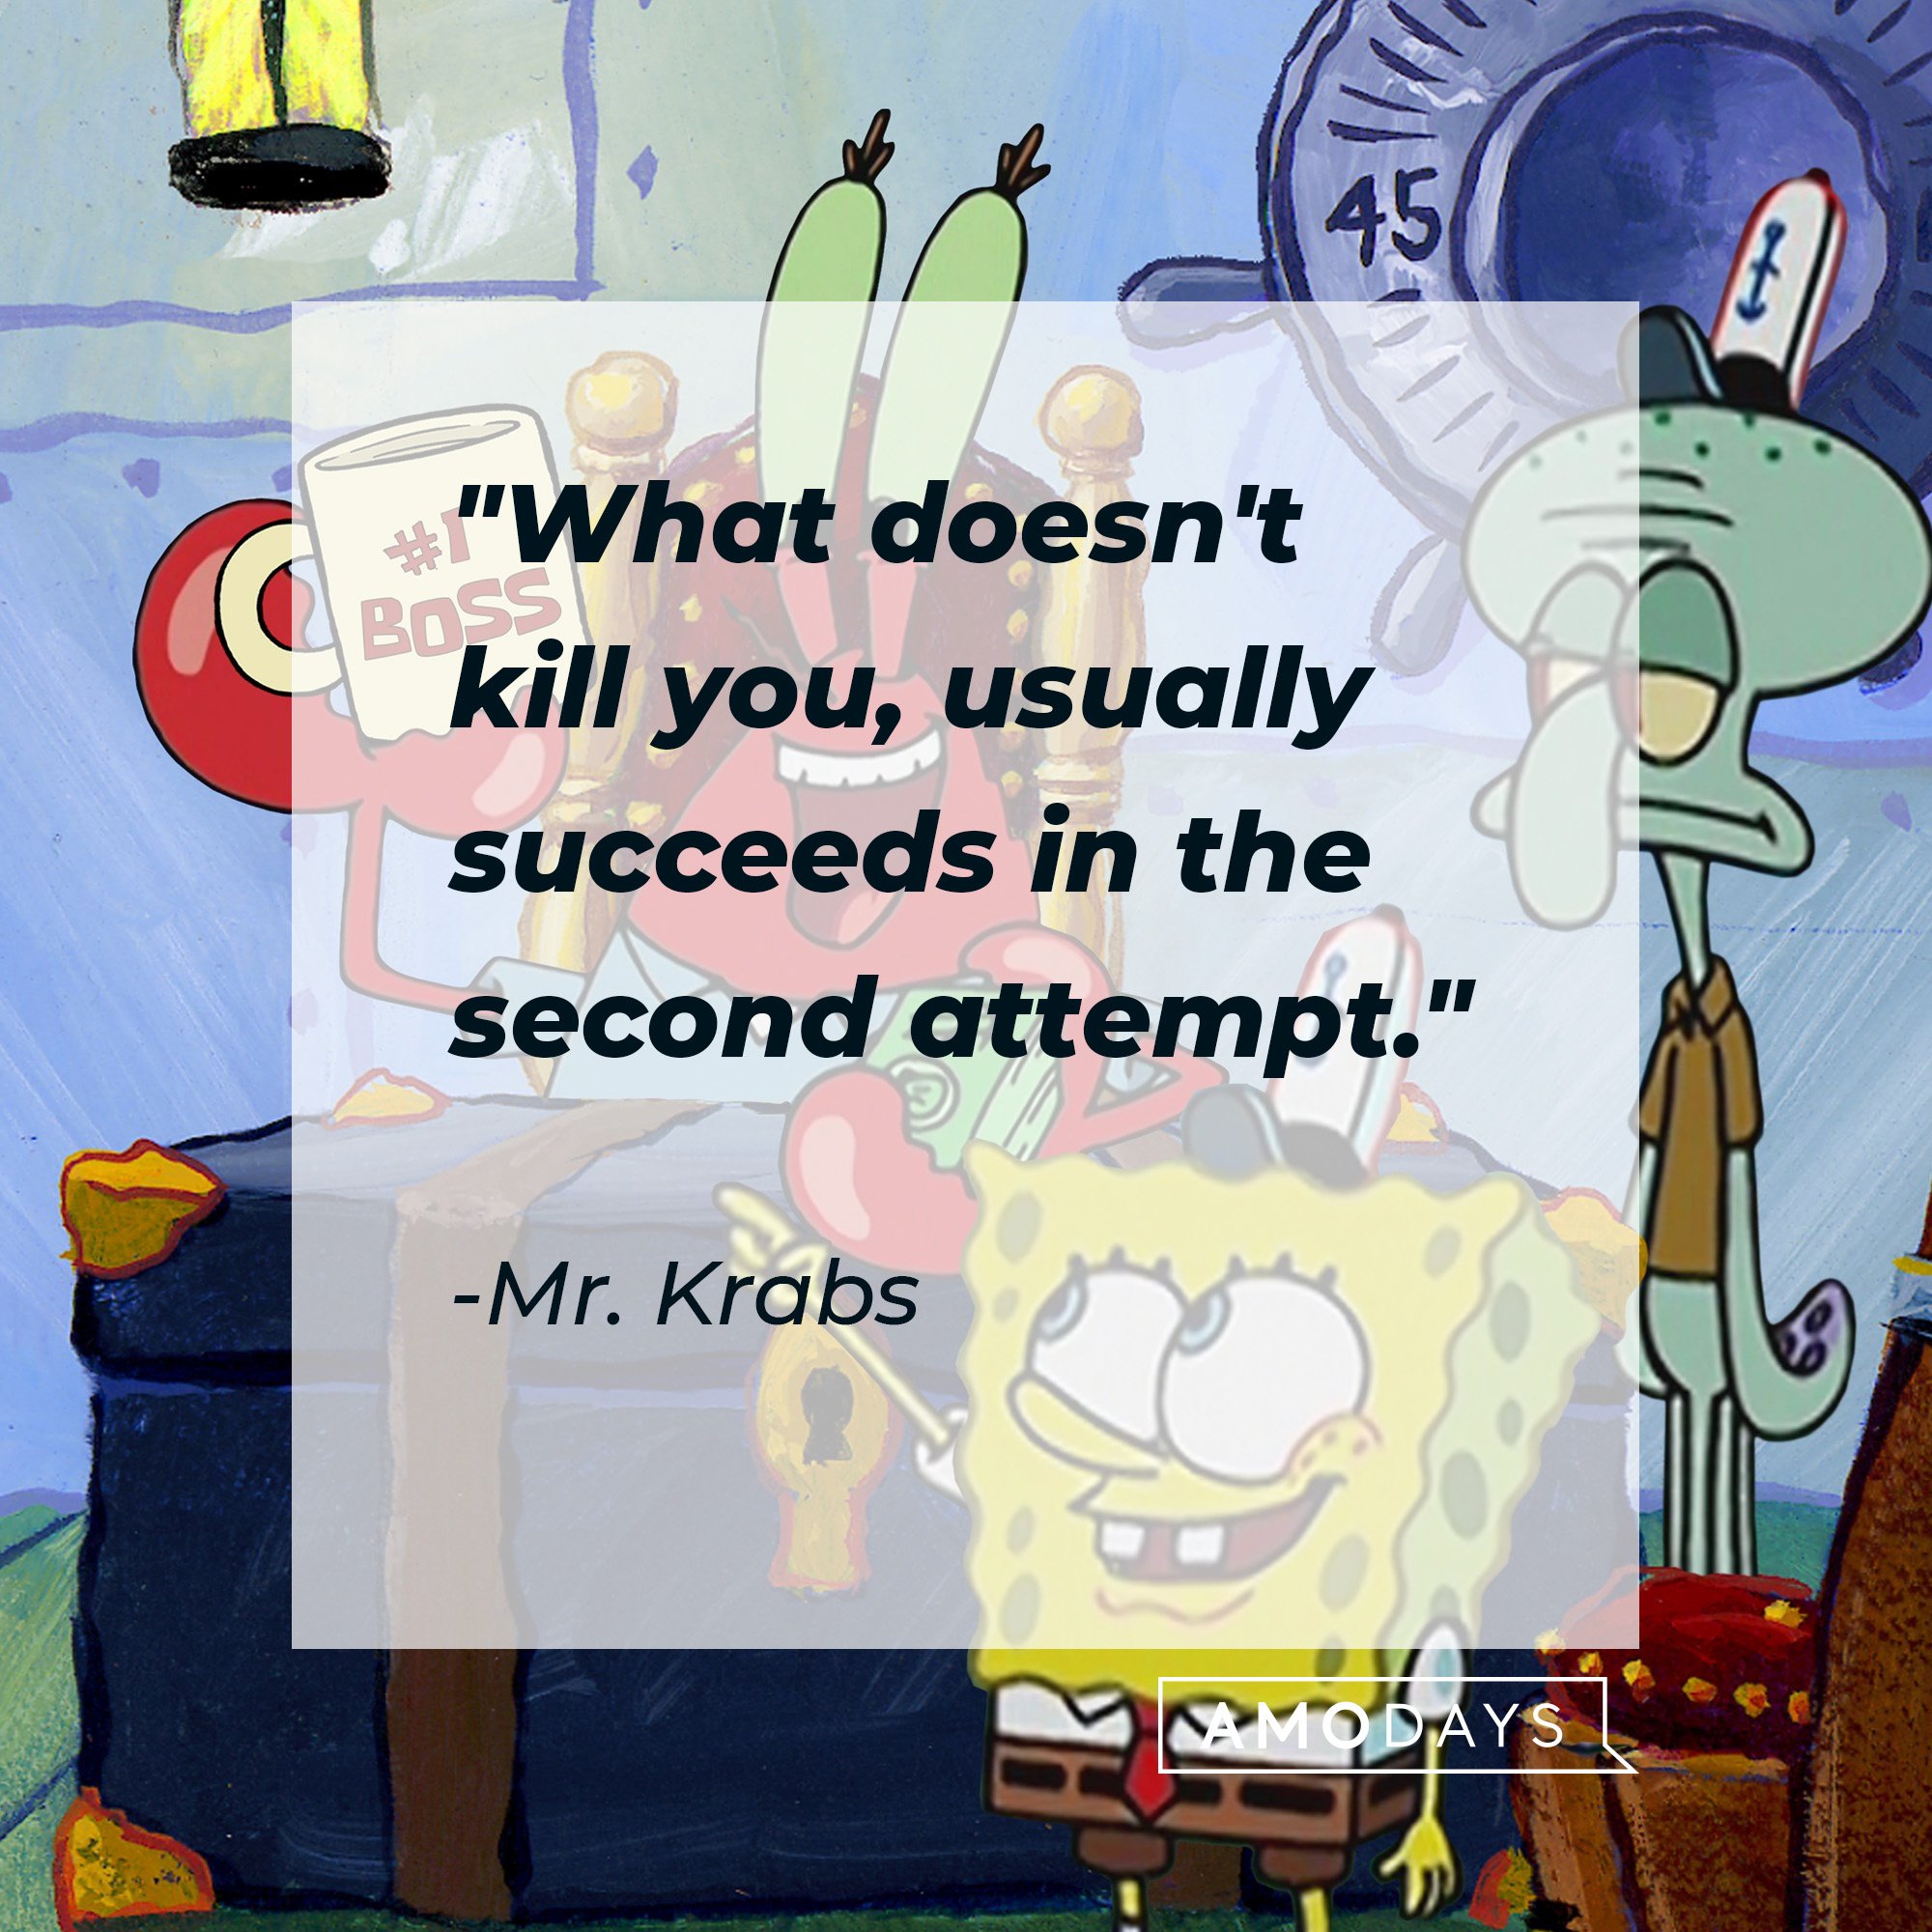 Mr. Krabs's quote: "What doesn't kill you, usually succeeds in the second attempt." | Image: AmoDays 